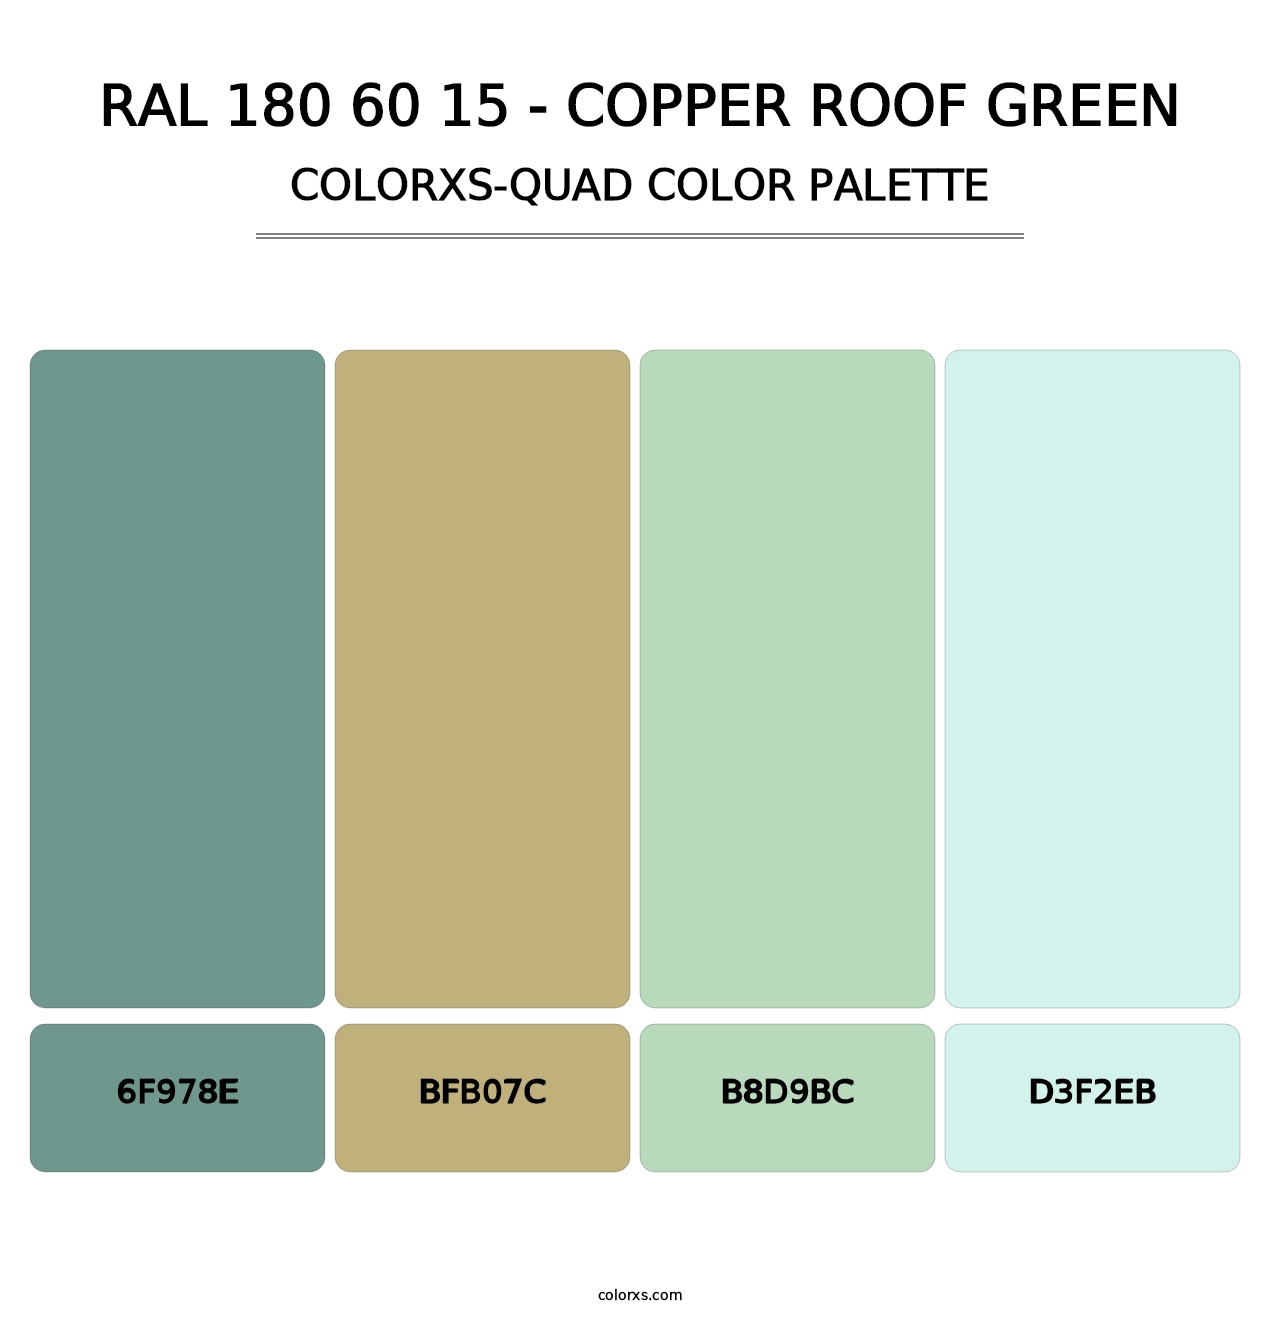 RAL 180 60 15 - Copper Roof Green - Colorxs Quad Palette